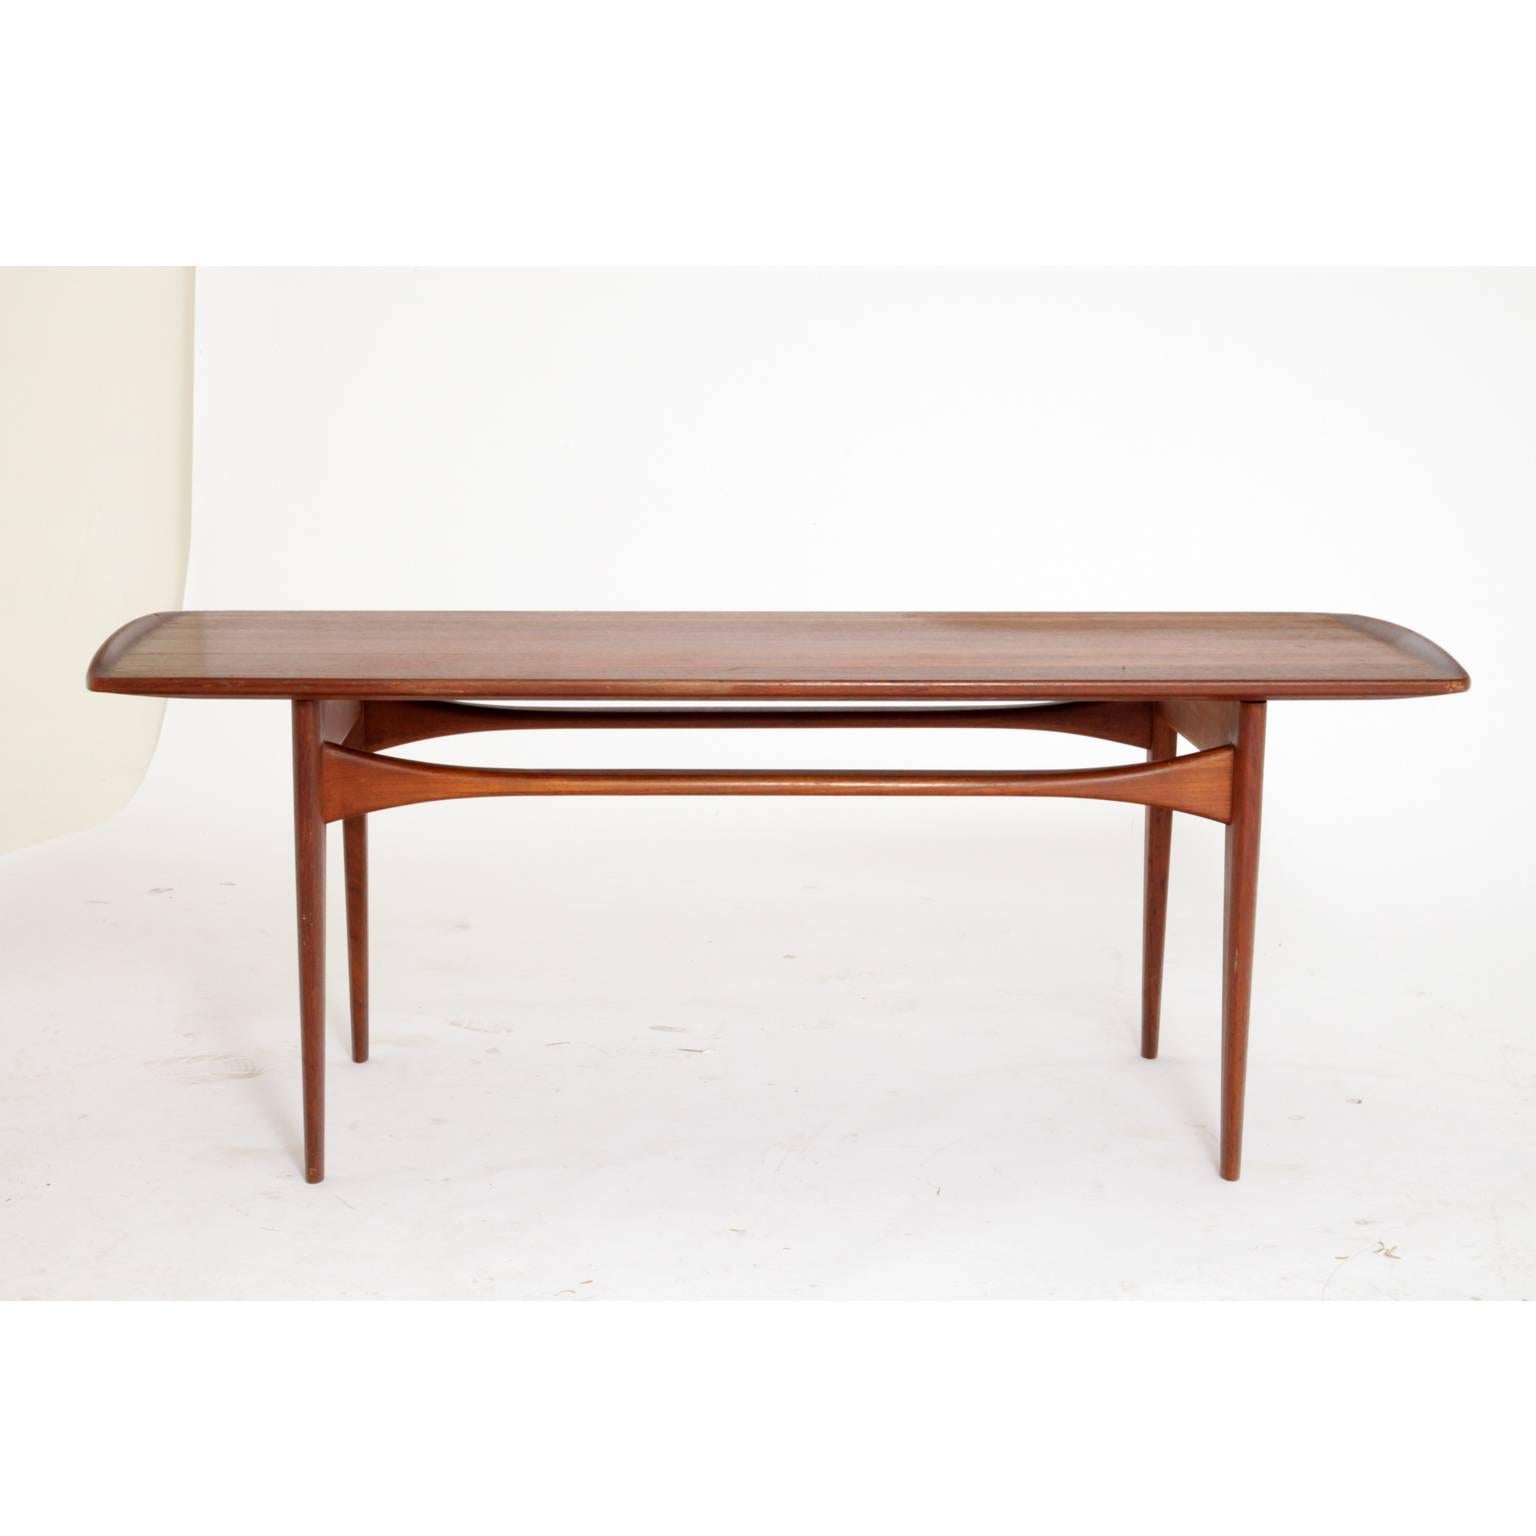 Organically formed coffee table by the Danish designer couple Tove and Edvard Kindt-Larsen. The table is made of teak and stands on tapered legs. The struts are getting smaller towards the centre while the tabletop rises a bit towards the small